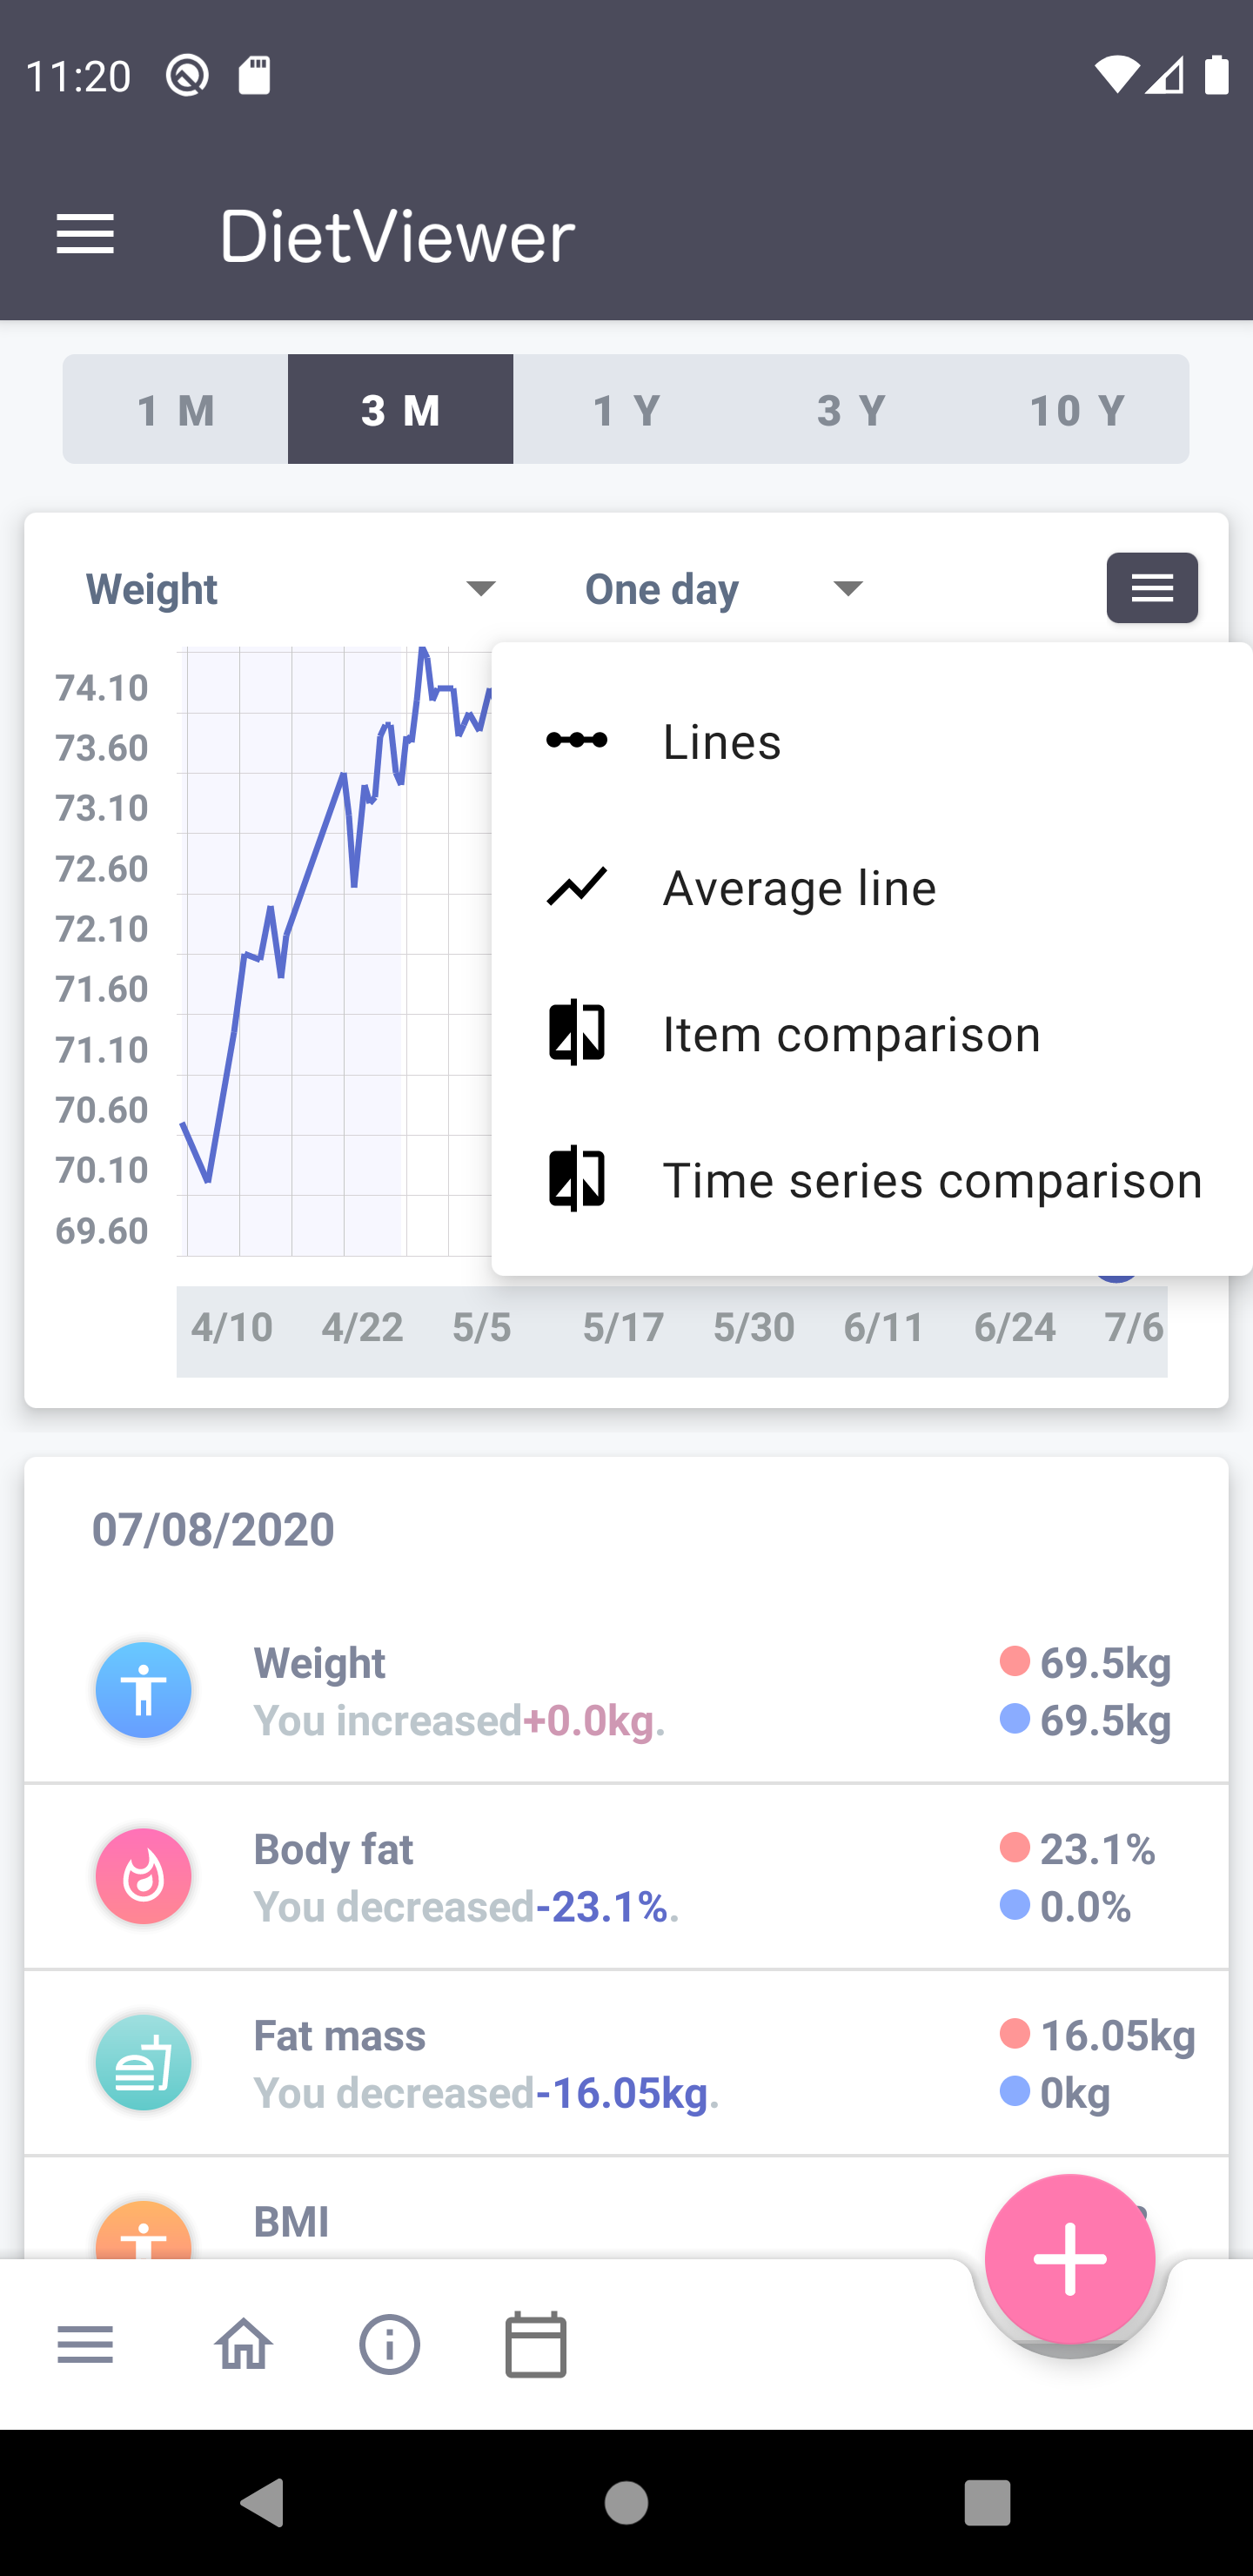 This is an image of a diet viewer graph.